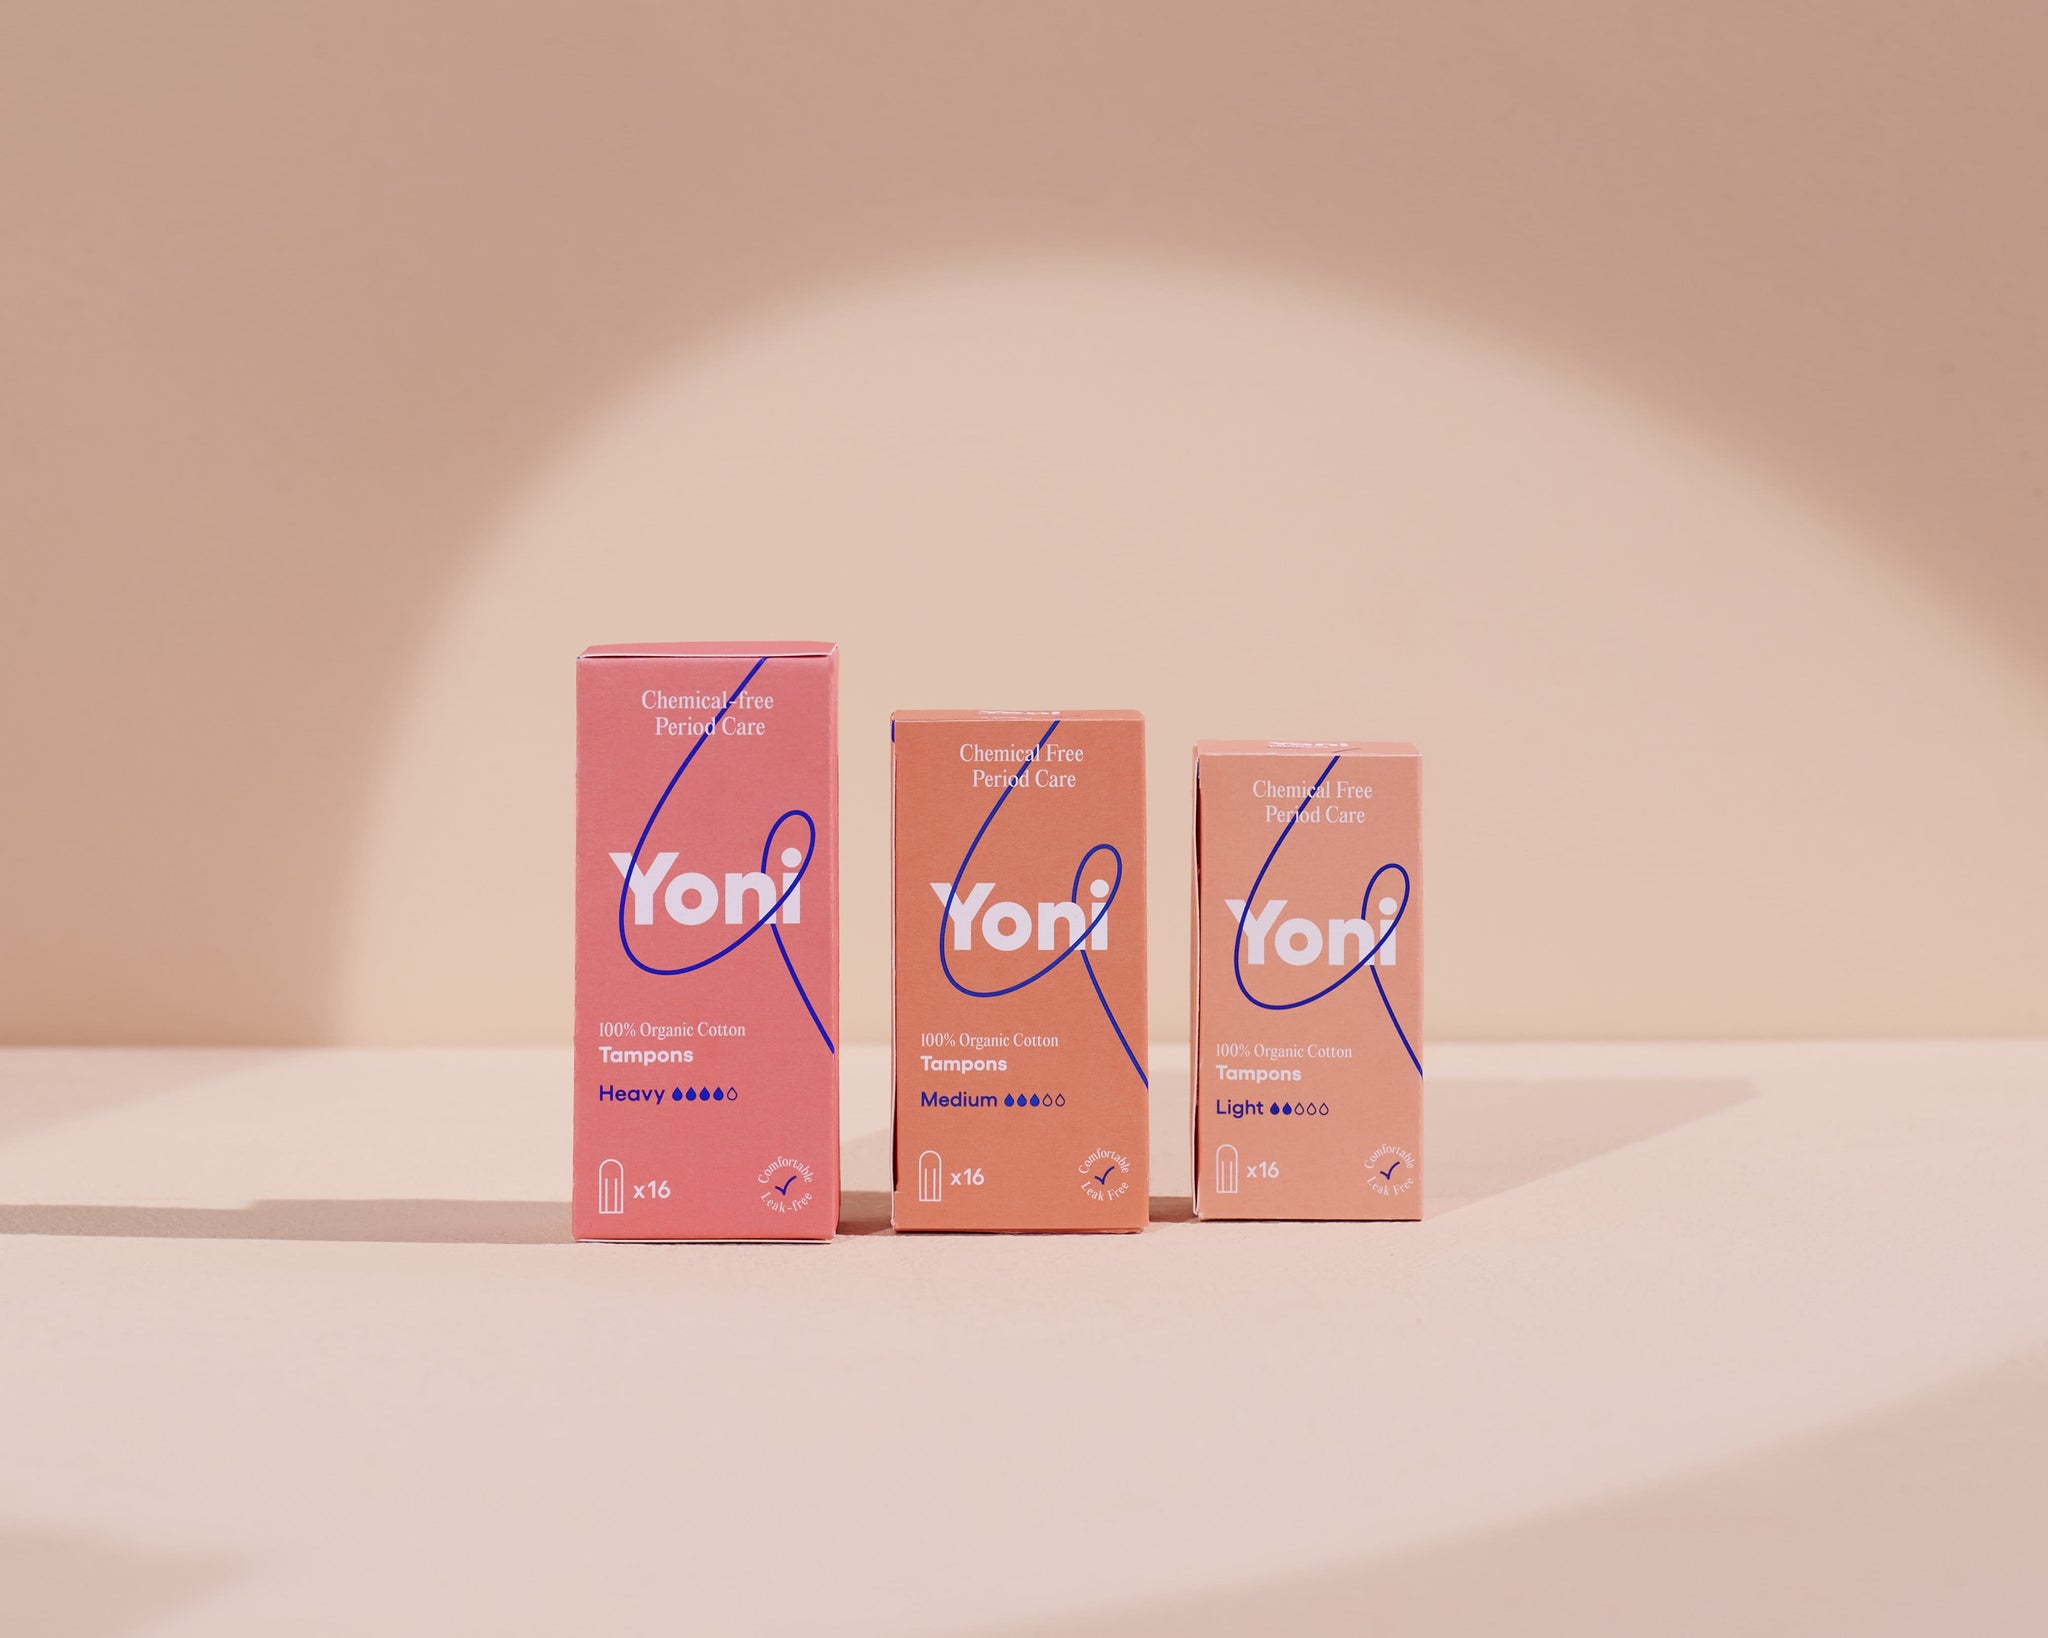 Yoni Applicator Tampons,Medium, Regular, Comfortable, Leak Free, 100% Organic,Biodegradable, Compostable, Cotton, Sustainable Living, Eco Sanitary Products, Period Care, No Plastic Films, Hypoallergenic, Care Free Period, Chemical Free, Nourished, Nourishedeu